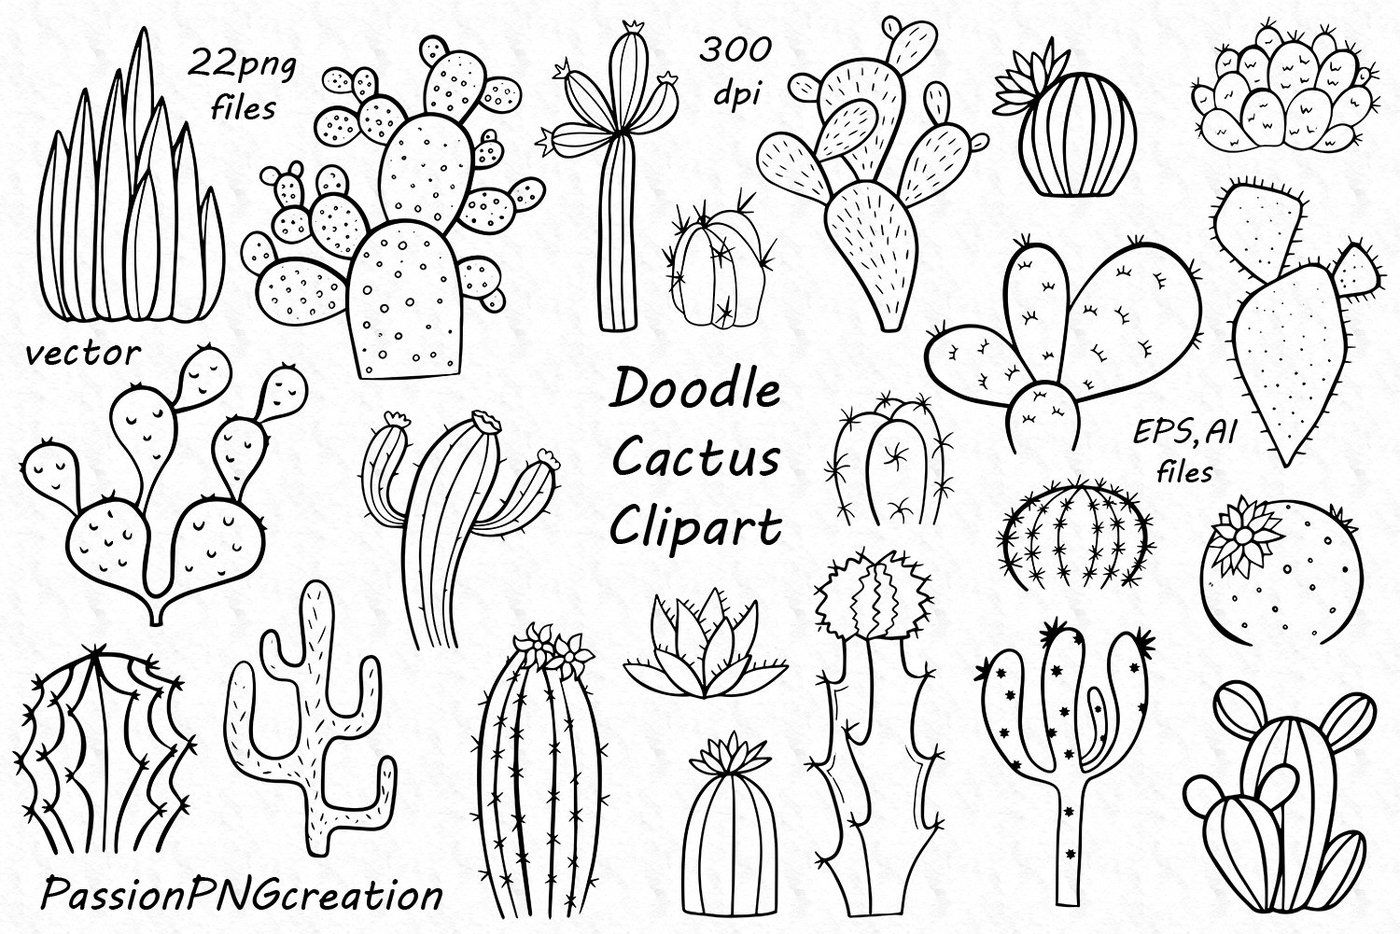 Doodle Cactus Clipart By PassionPNGcreation | TheHungryJPEG